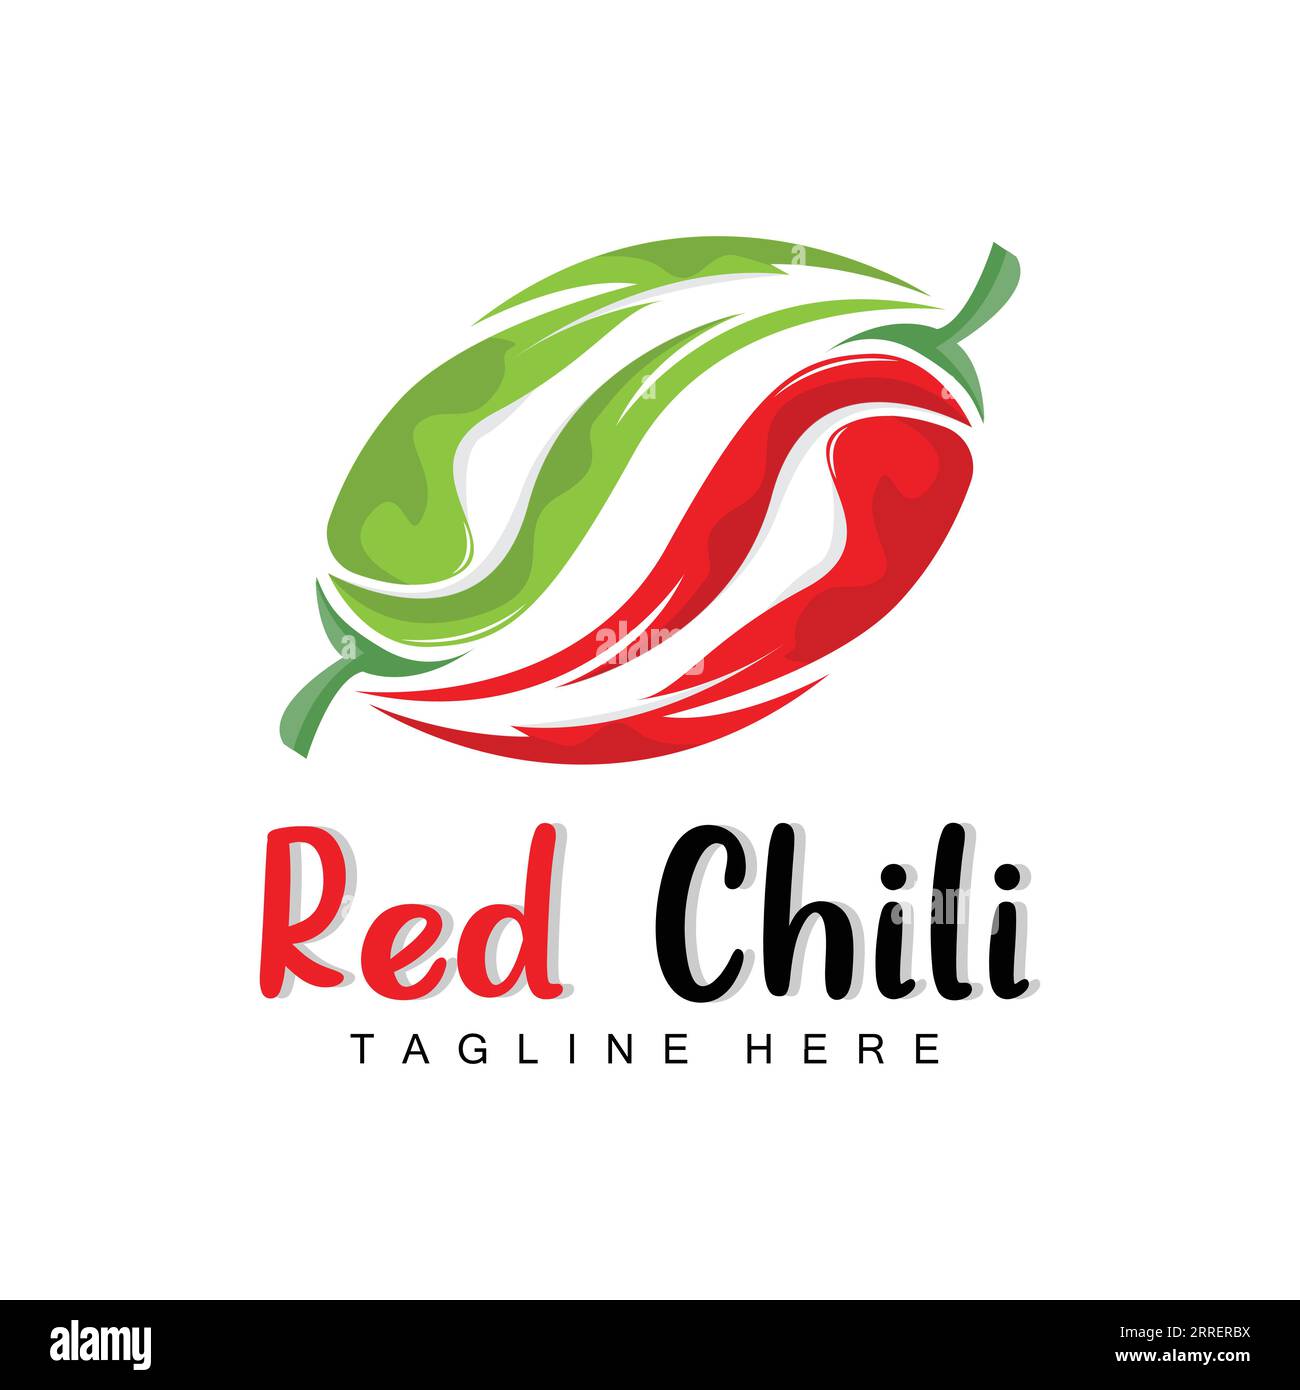 Red Chili Logo, Hot Chili Peppers Vector, Chili Garden House Illustration, Company Product Brand Illustration Stock Vector